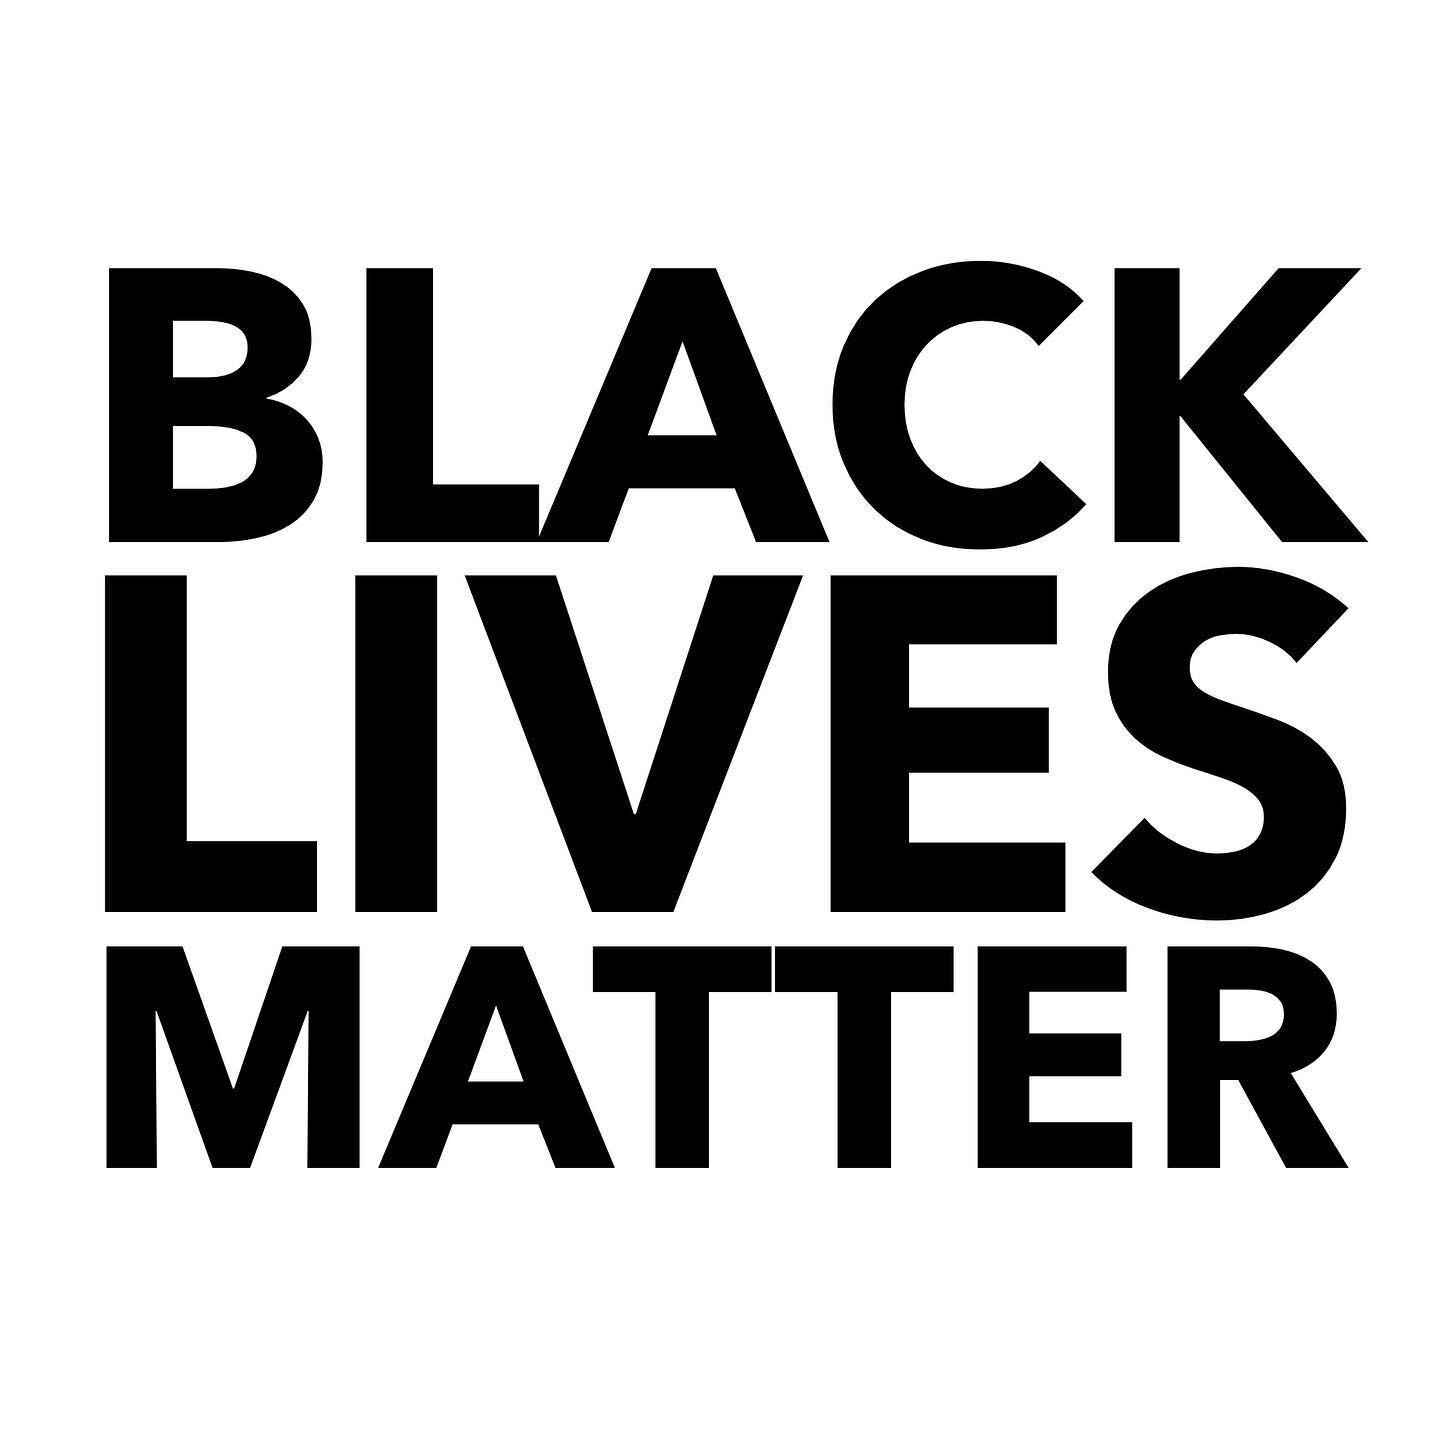 Continue to lift each other up. #blacklivesmatter